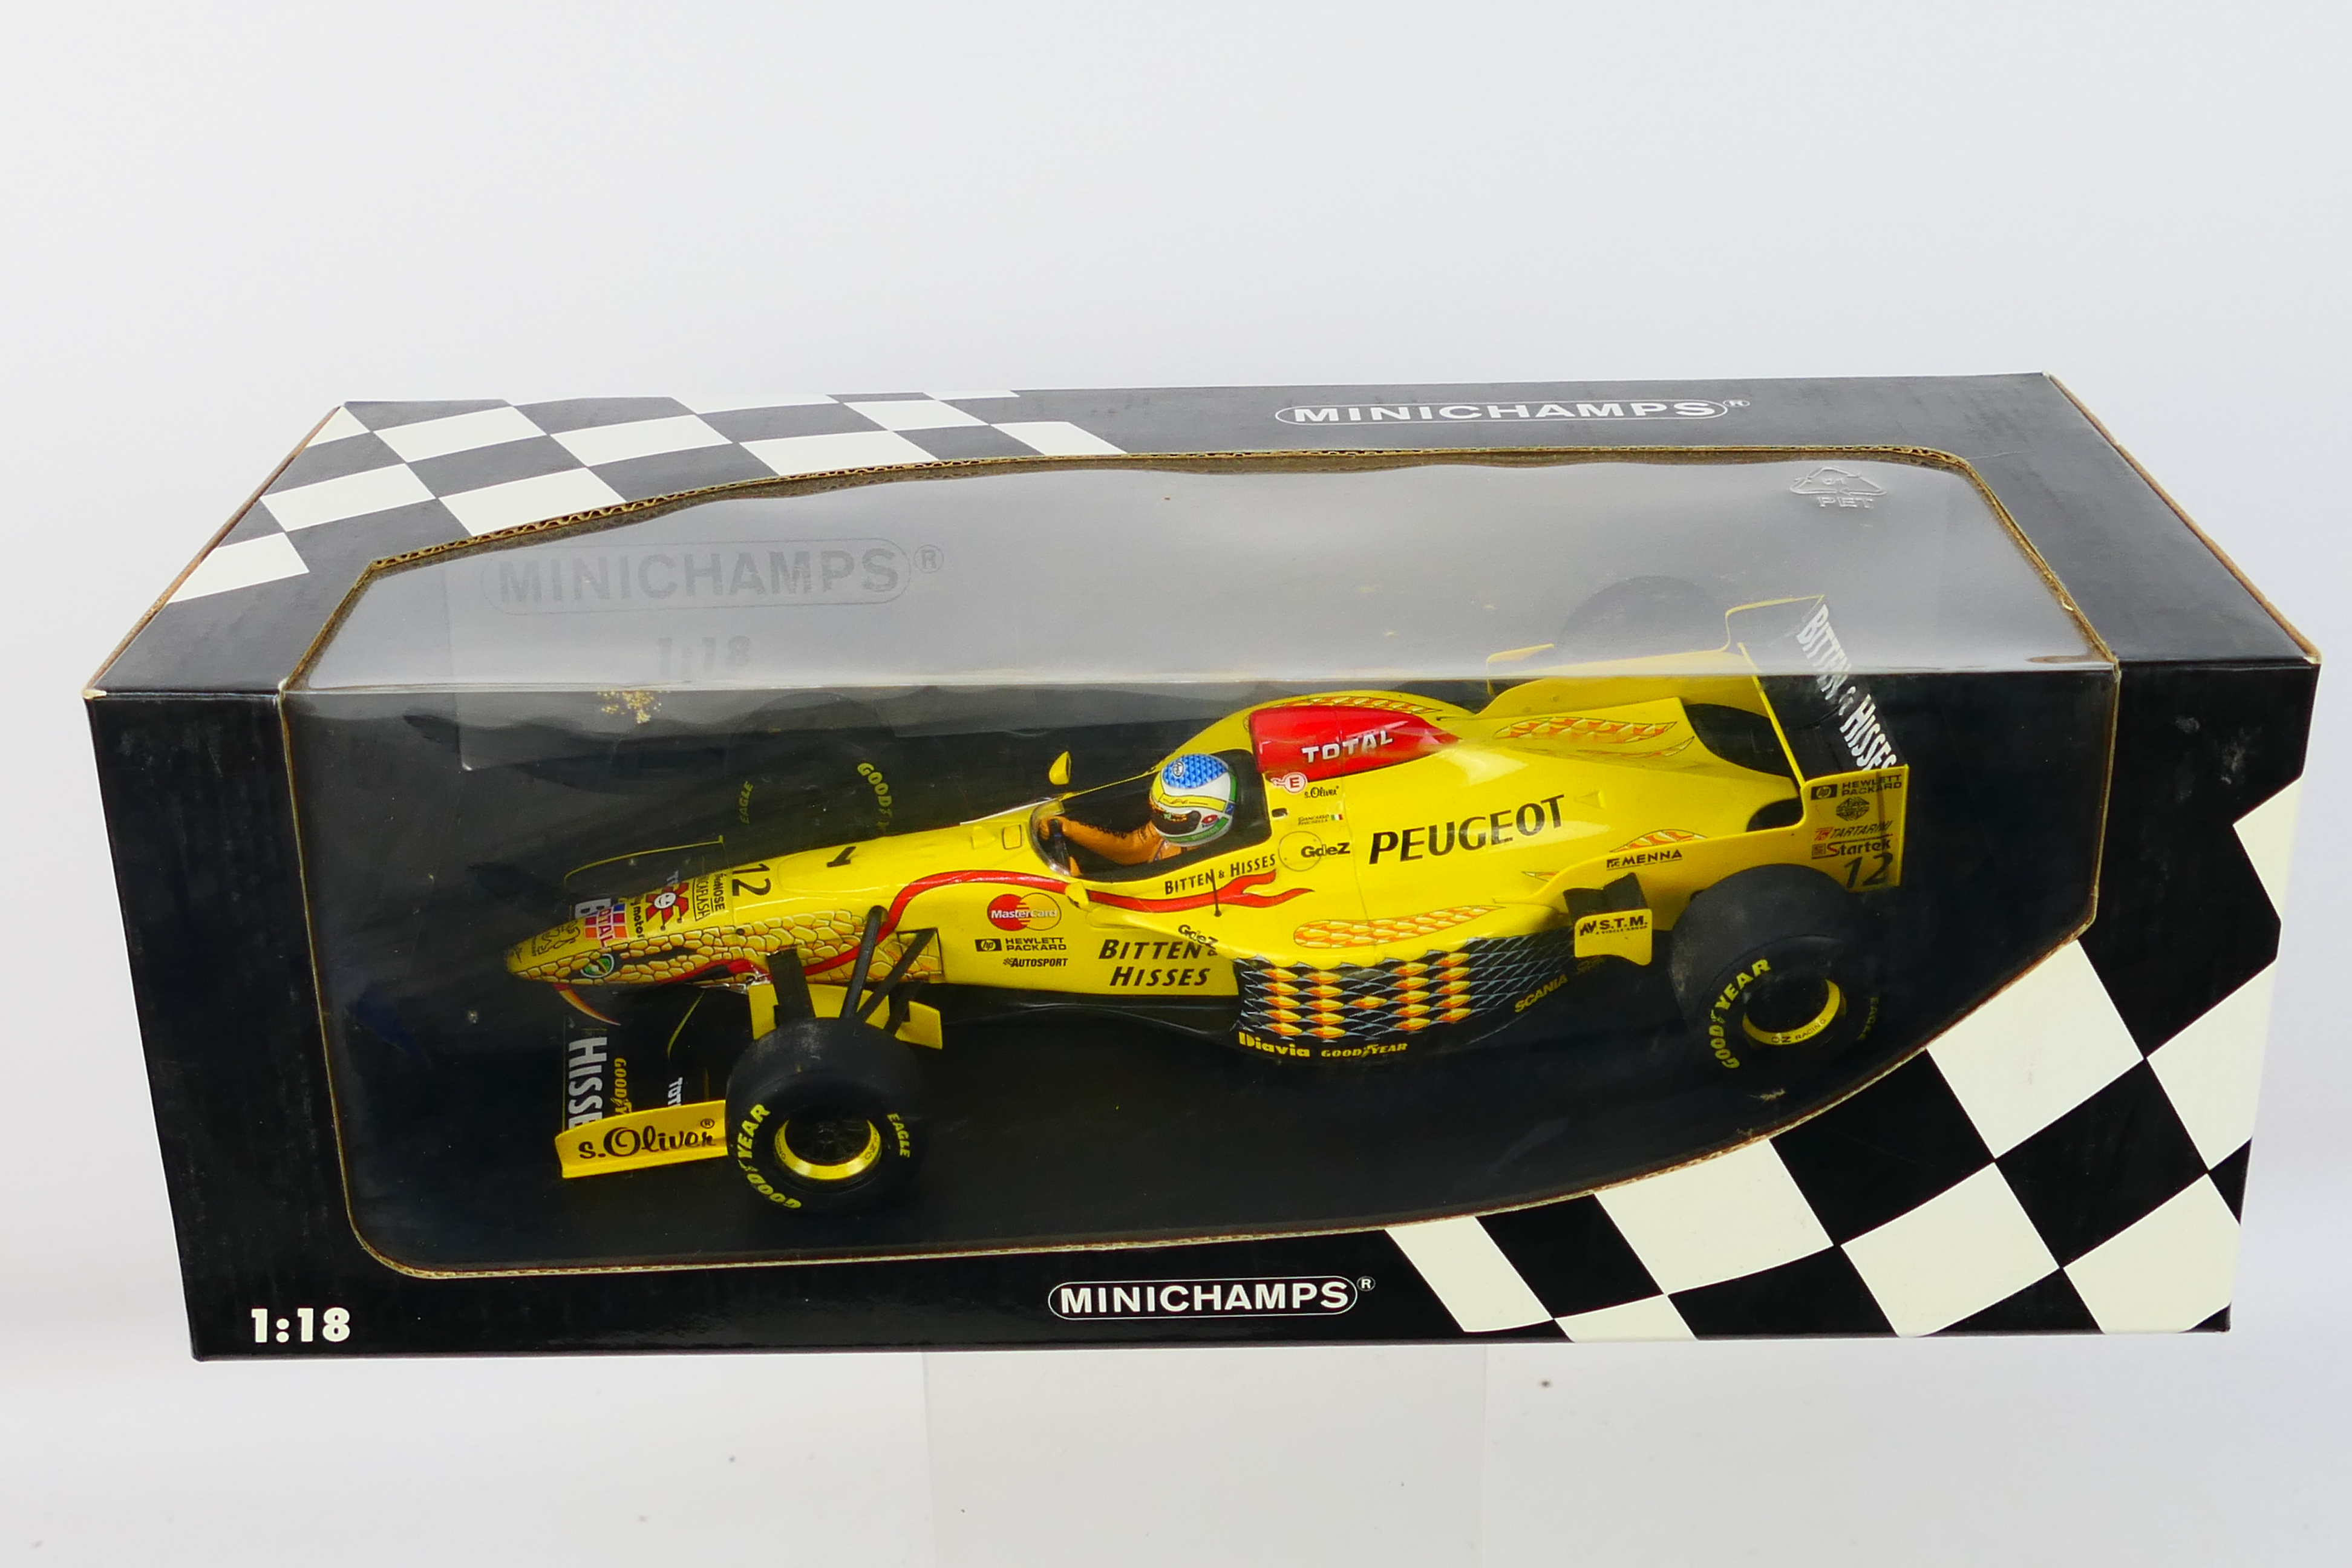 Minichamps- A boxed 1:18 scale Jordan 197 Peugeot 197 Giancarlo Fisichella car which appears Mint - Image 3 of 3